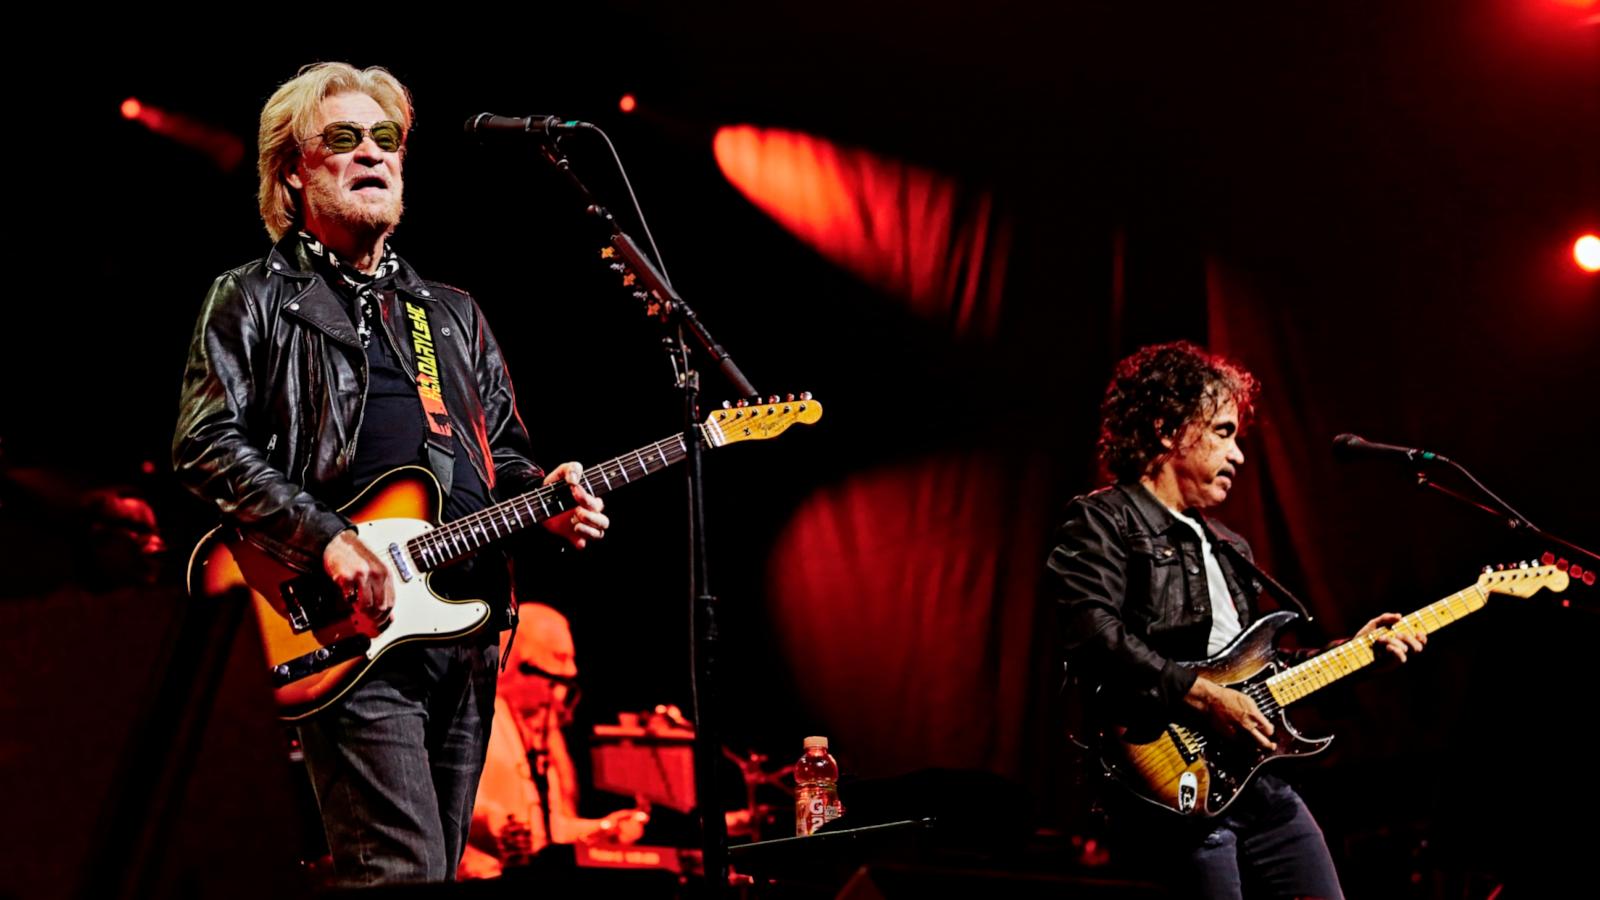 PHOTO: Daryl Hall & John Oates perform at North Sea Jazz Festival, July 14, 2019 in Rotterdam, the Netherlands.